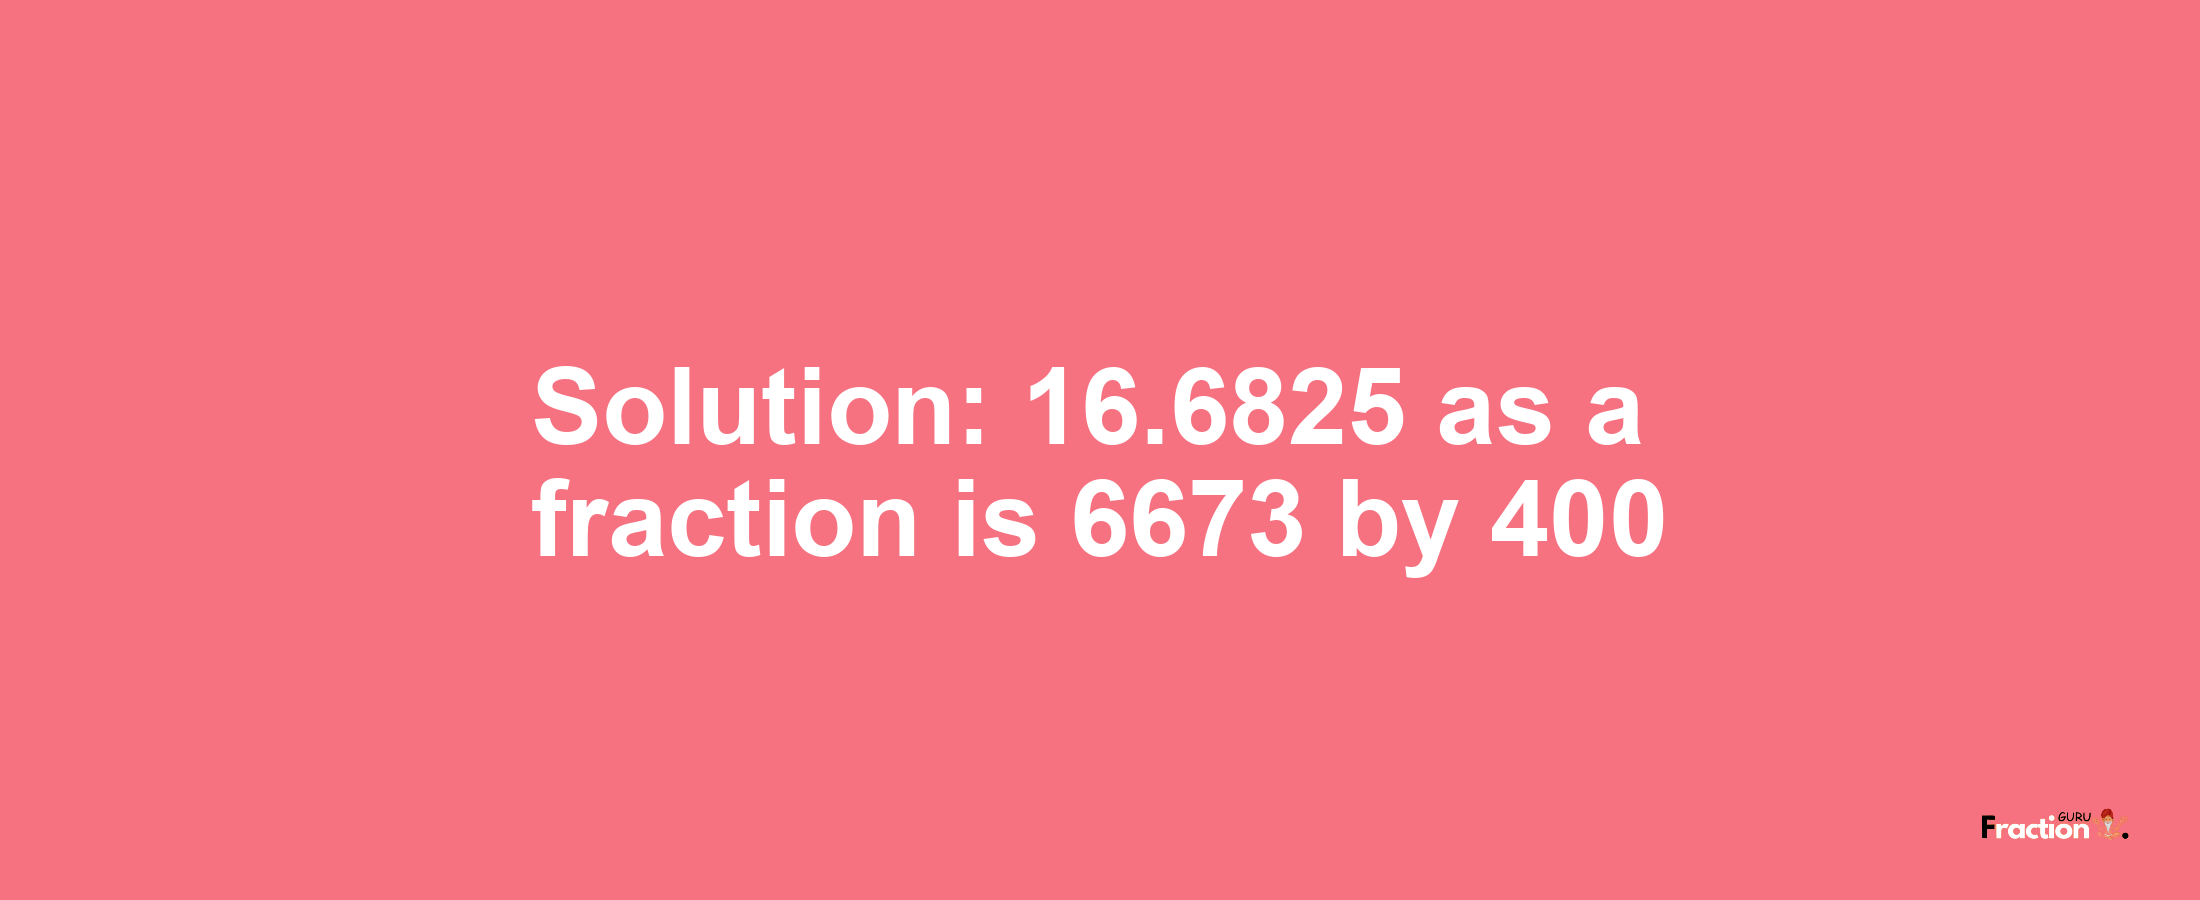 Solution:16.6825 as a fraction is 6673/400